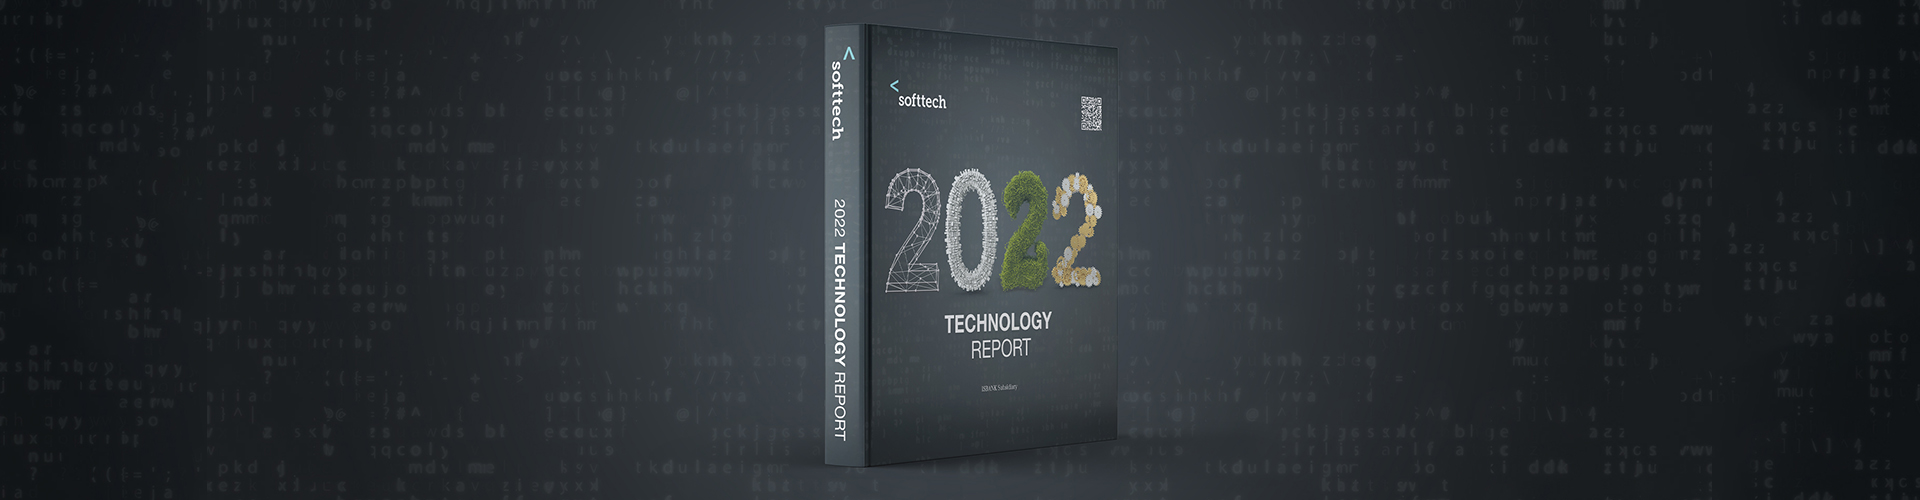 We have published our “2022 Technology Report”